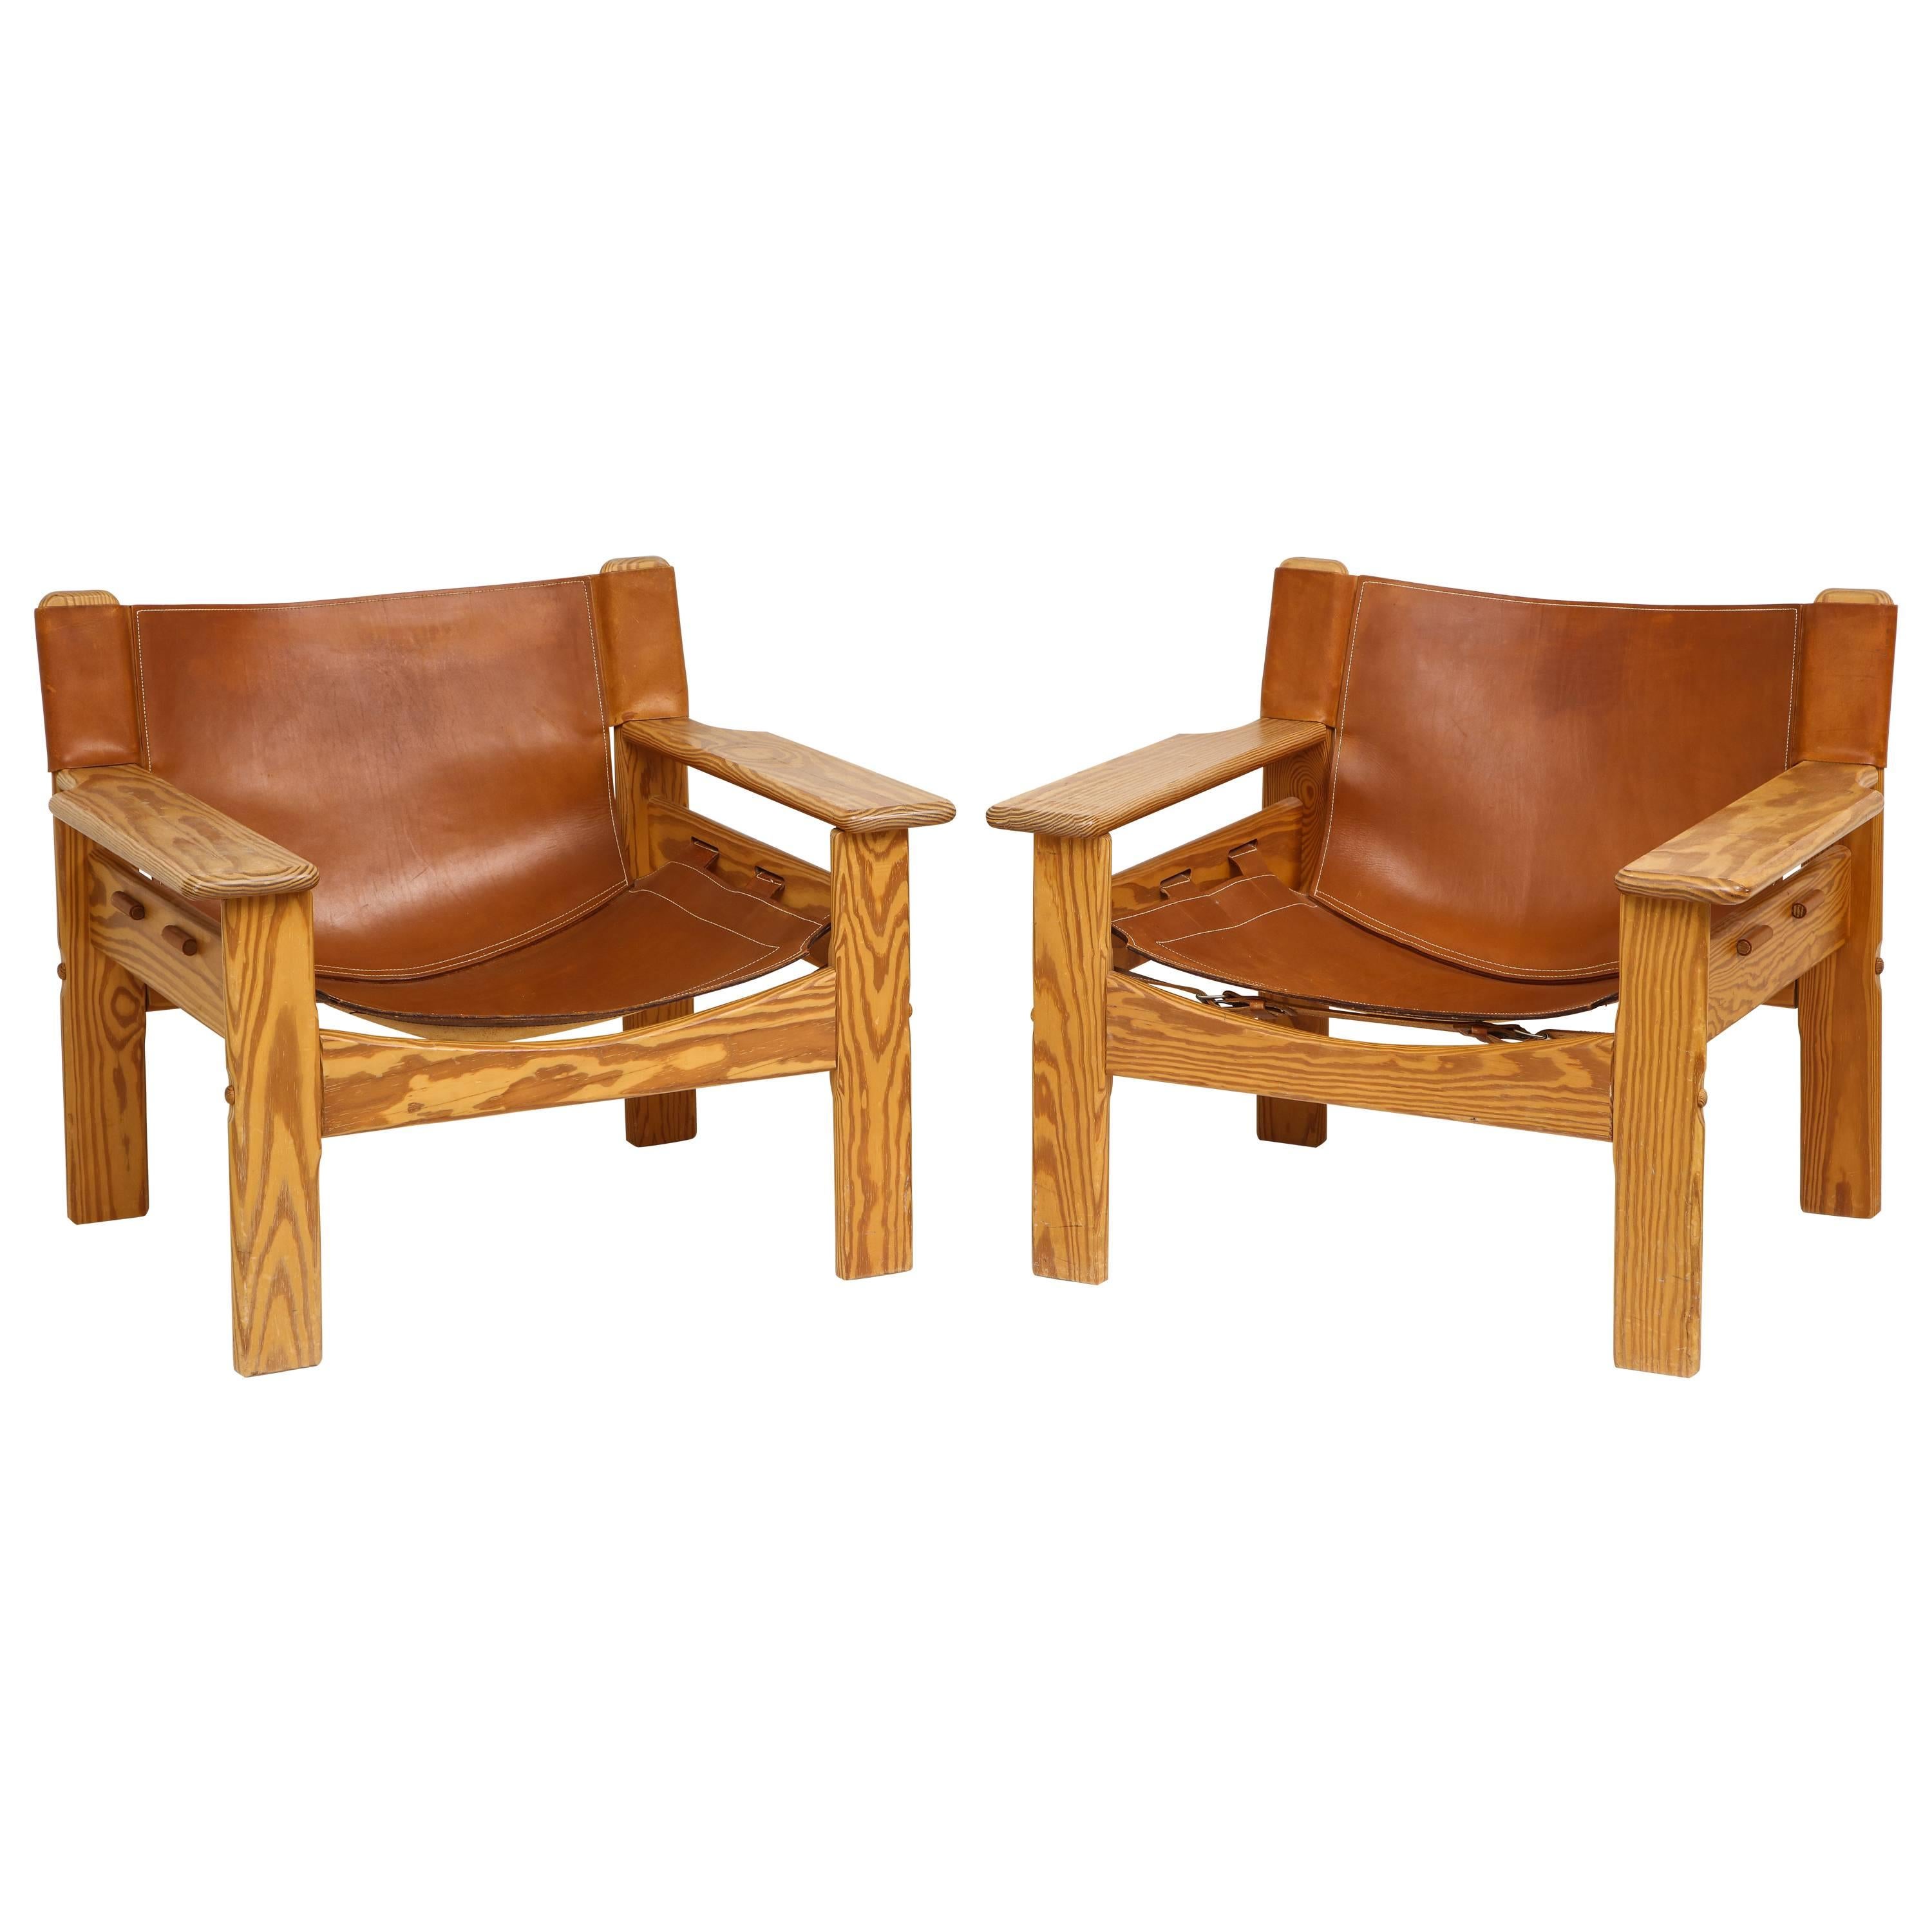 Pair of Wood and Leather Spanish Safari Chairs